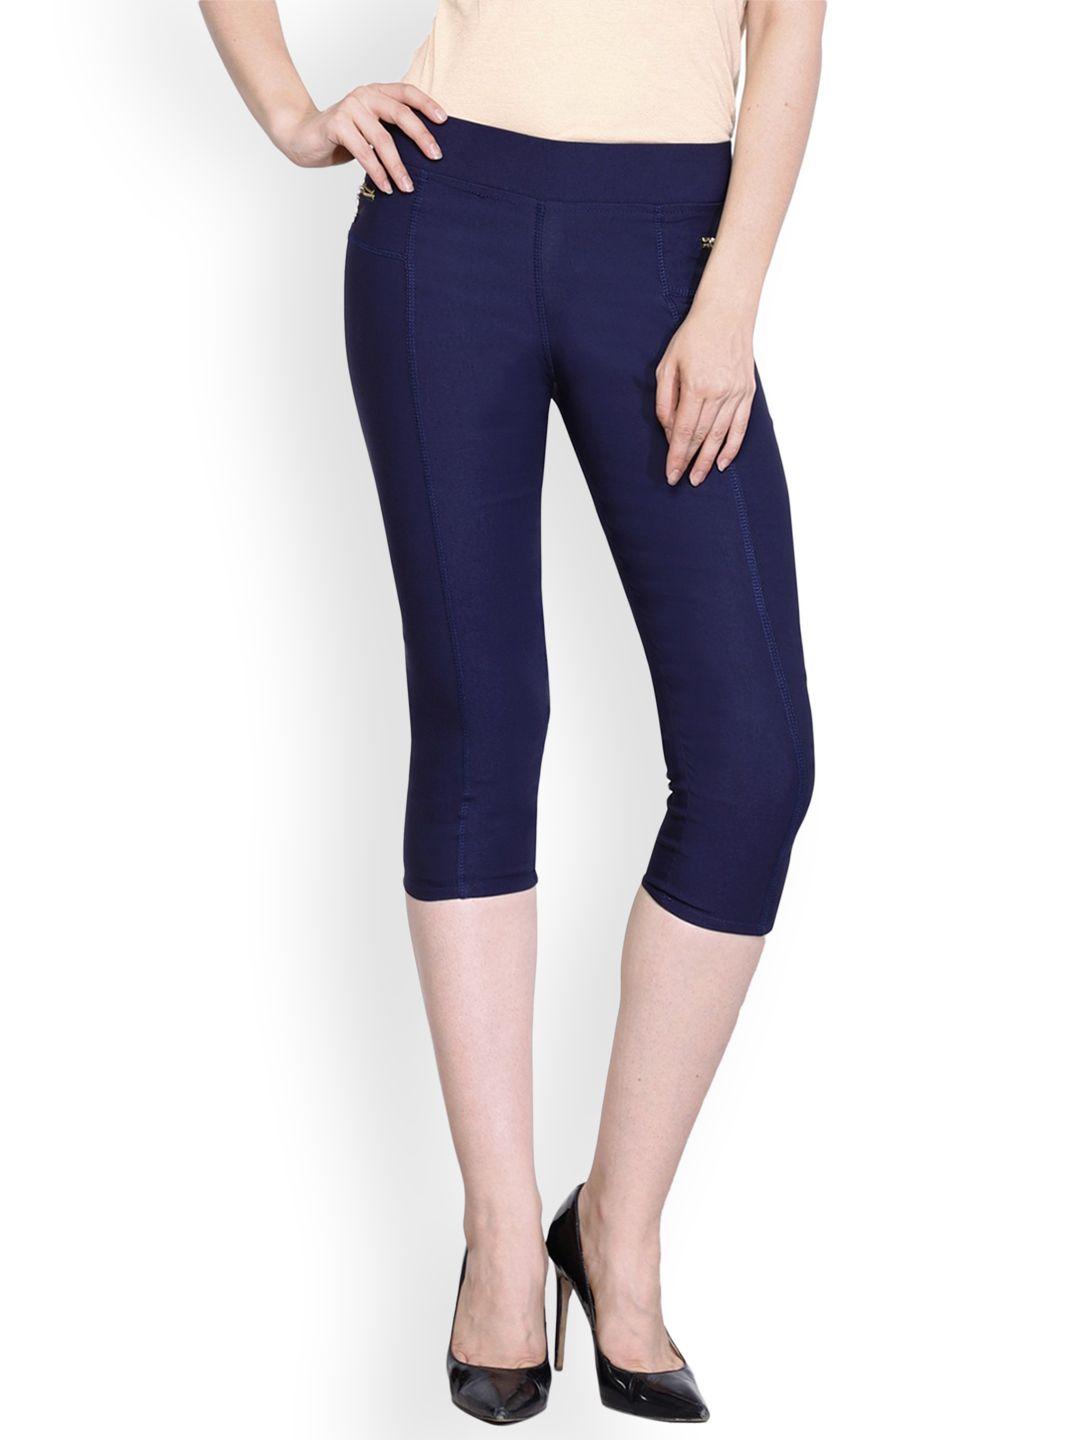 westwood women navy blue solid tight fit capris